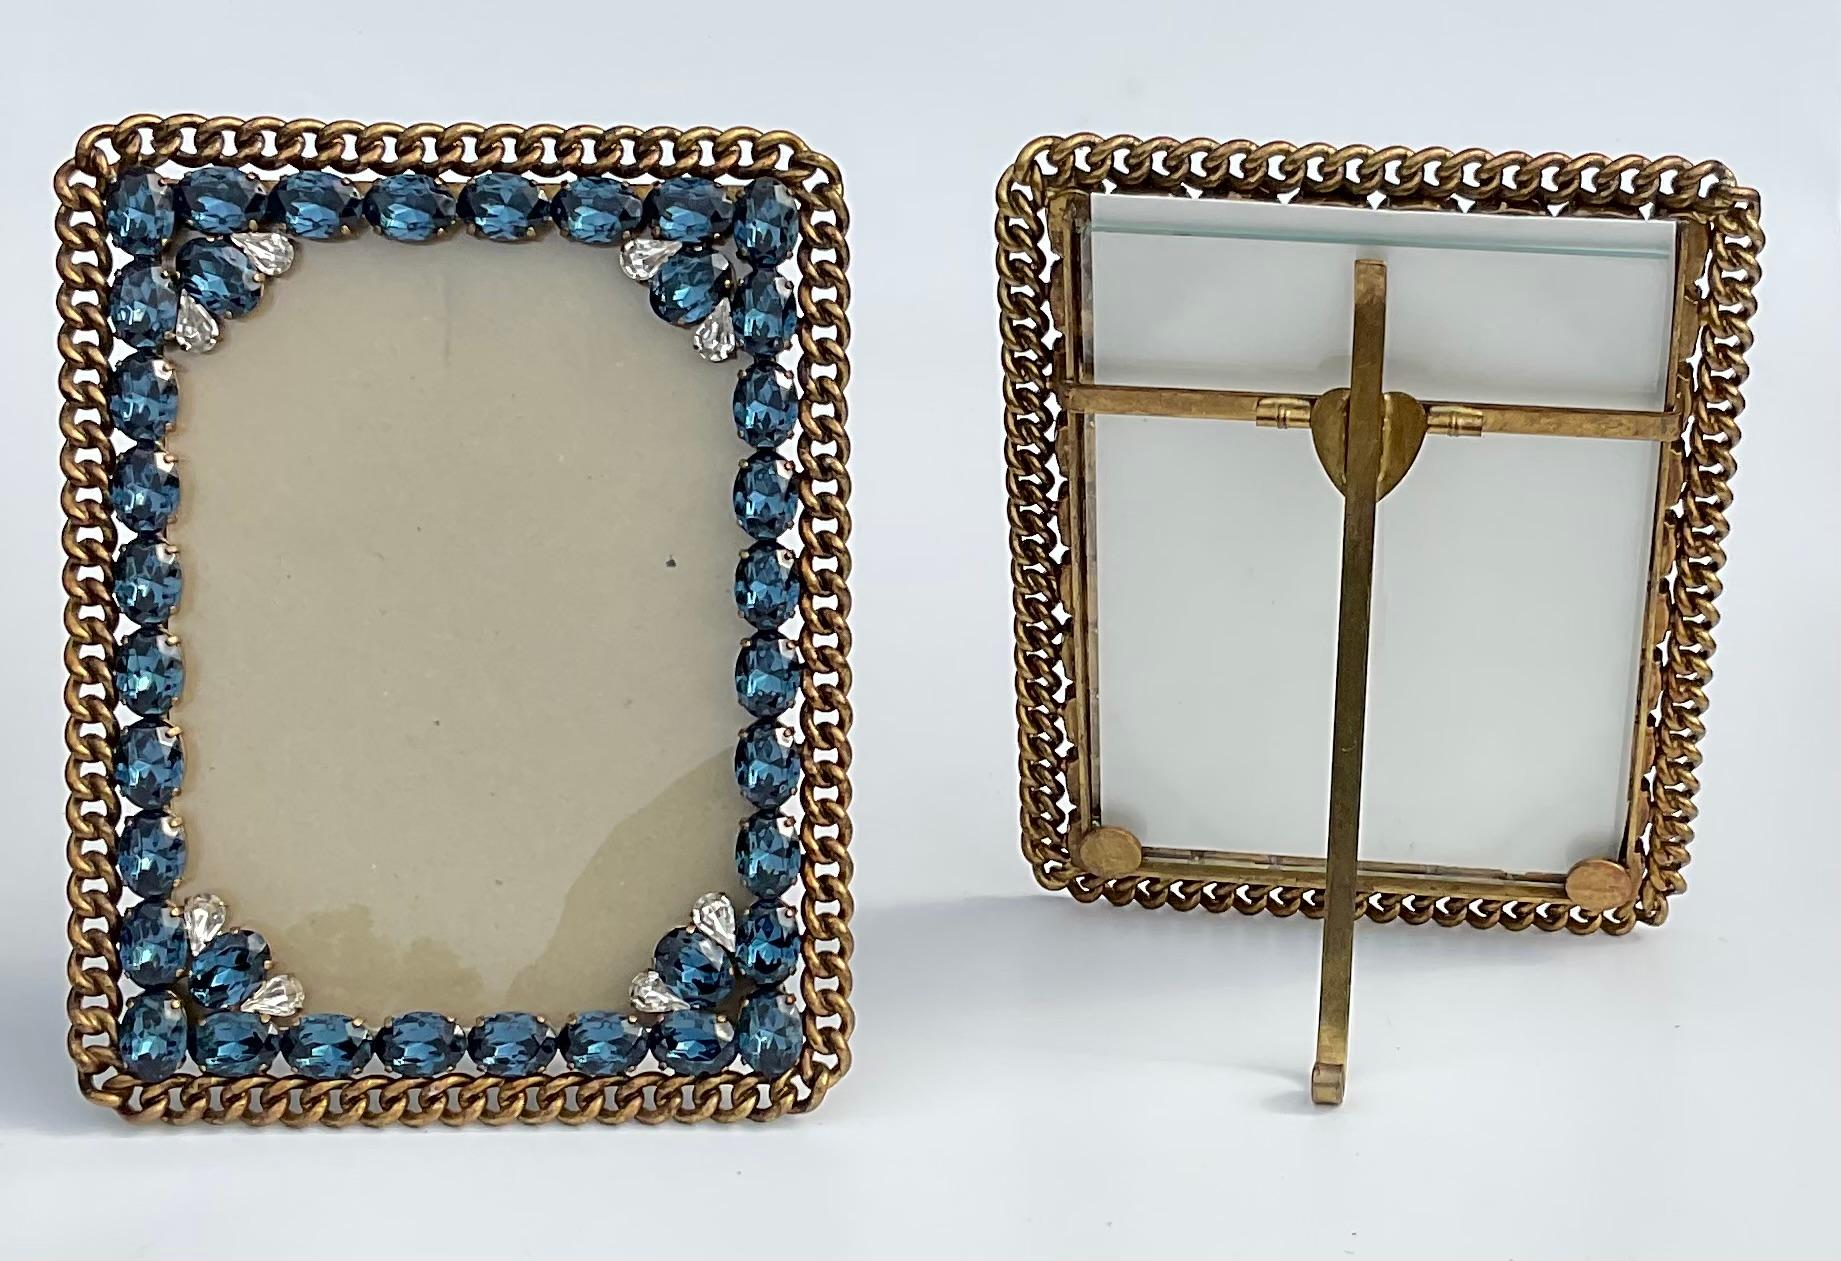 Very rare to find one, but a pair of these exceptional frames is almost impossible to find. Large blue stones, and smaller Clear stones really enhance the look of these frames. The metal is known as a wedding ring design which originated in England.